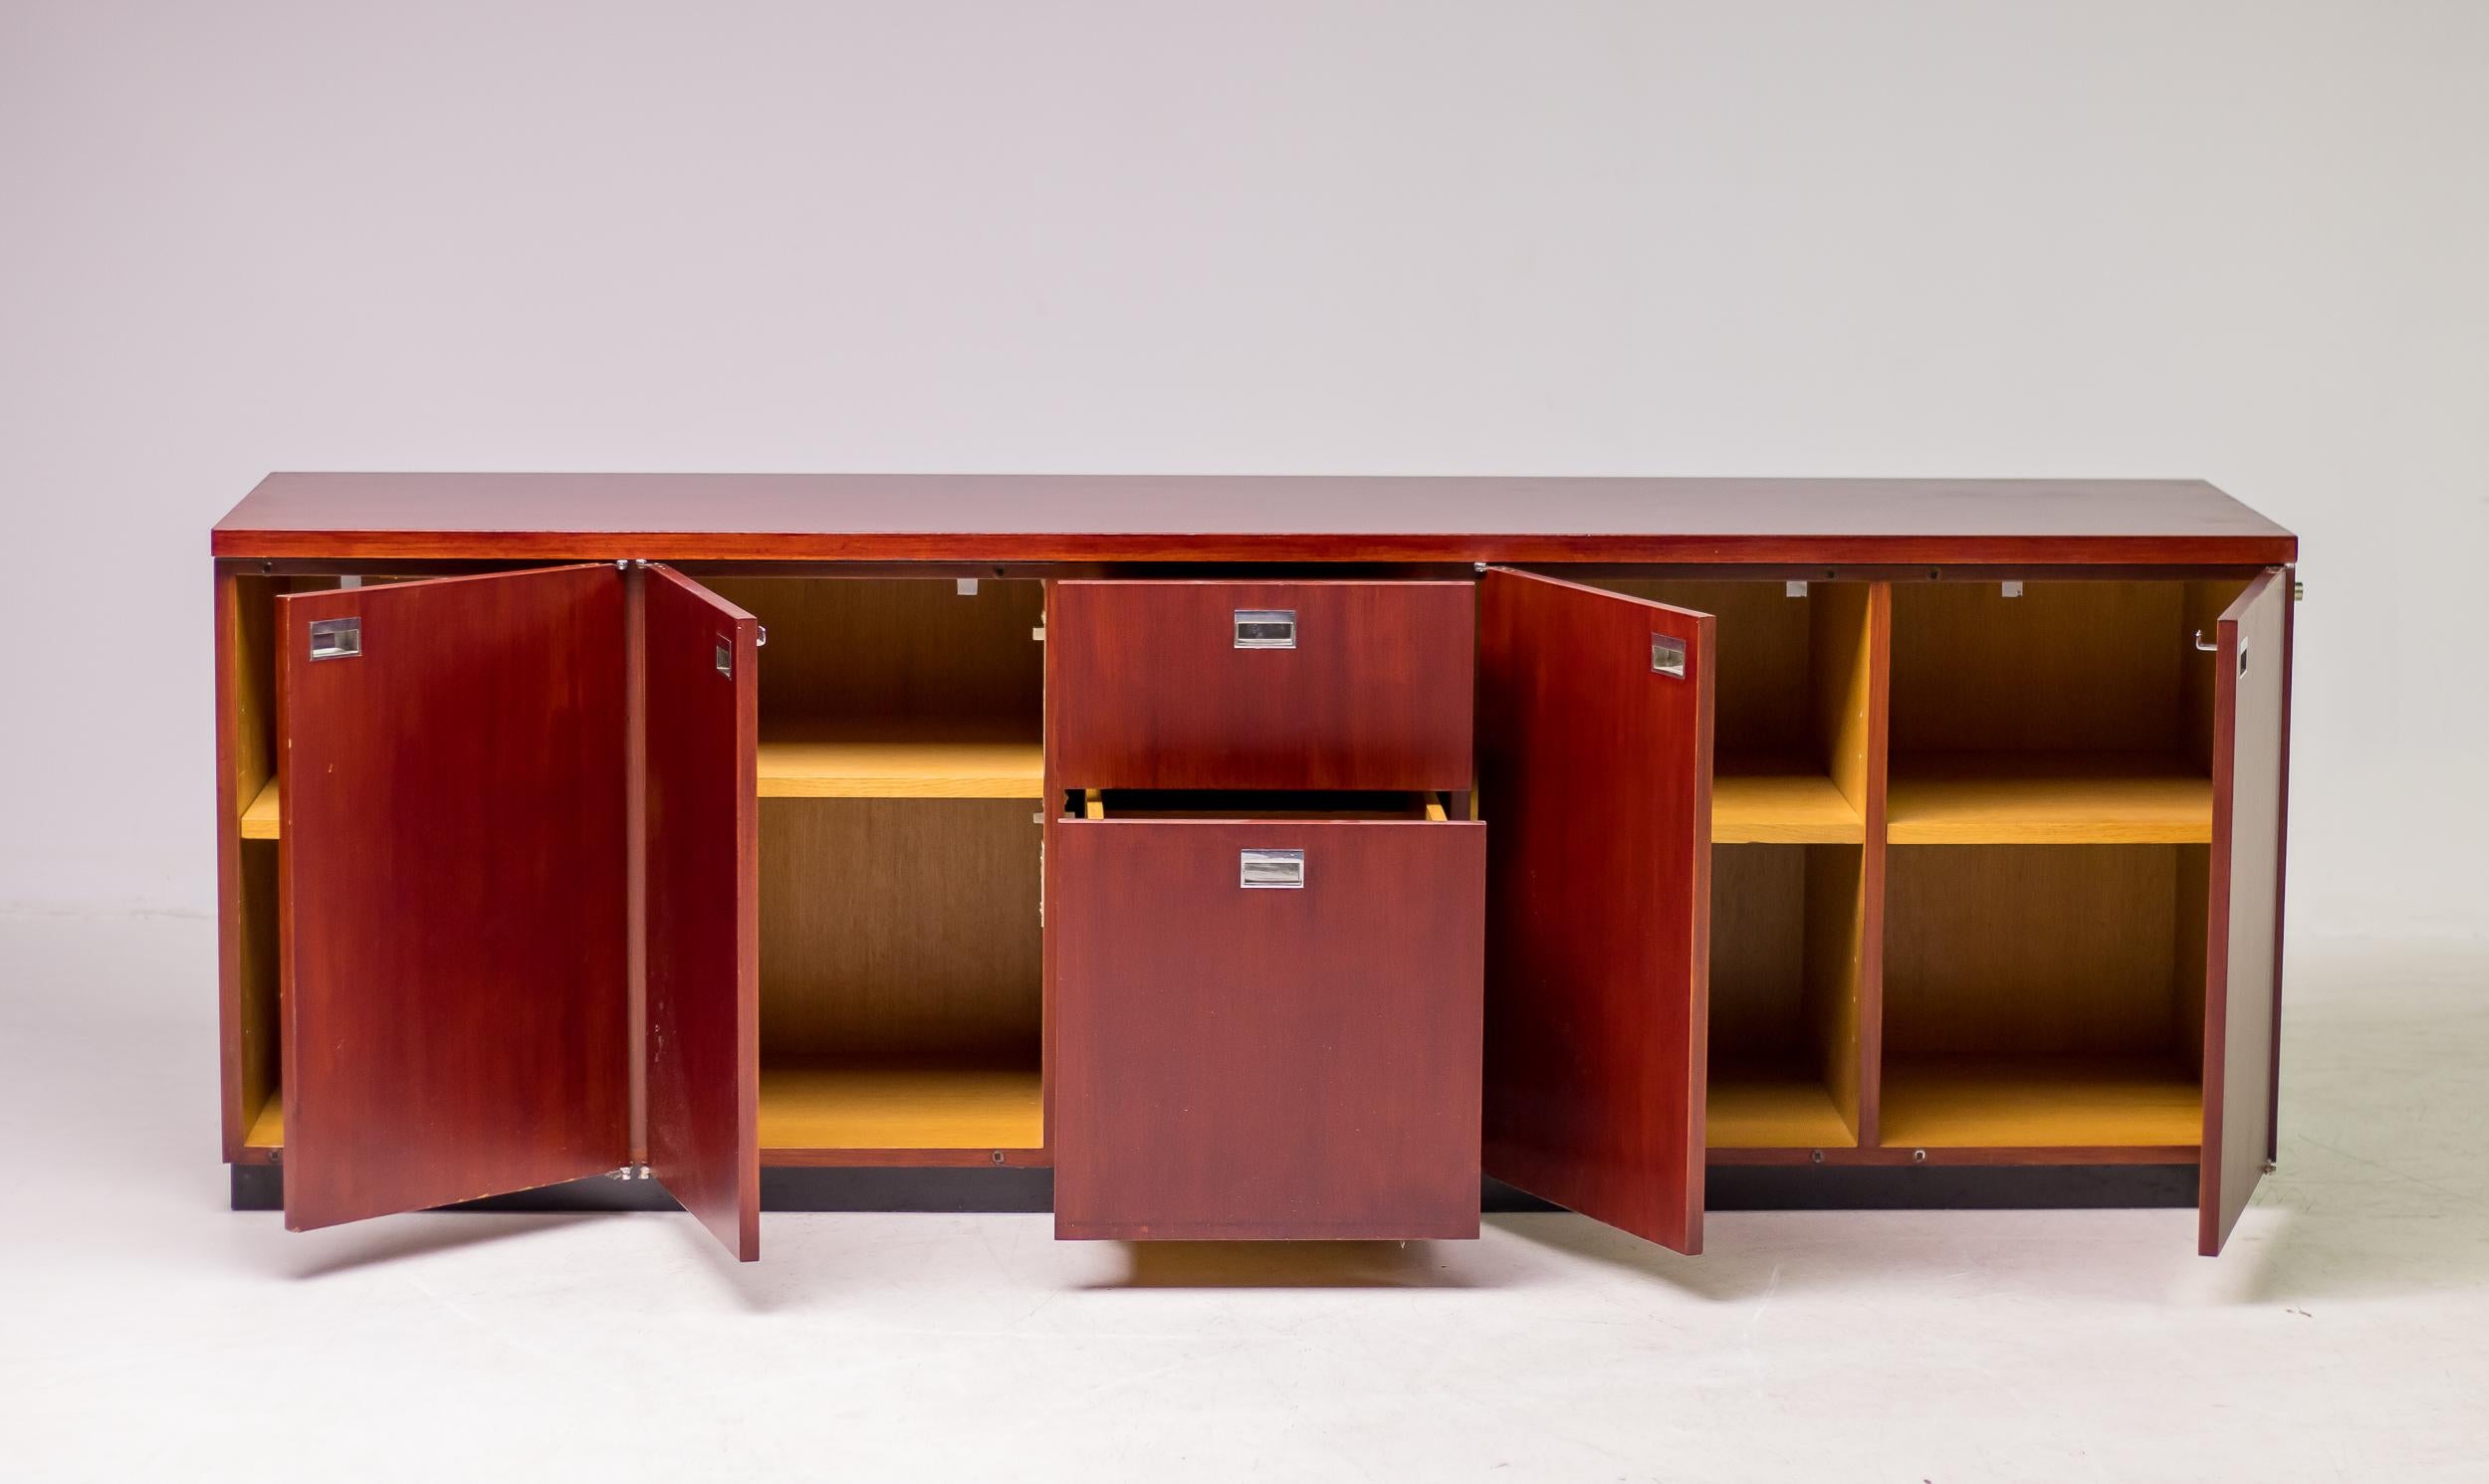 Mahogany credenza with chrome recessed pulls, designed by Gordon Bunschaft and manufactured by De Coene for the Belgium Lambert Bank, circa 1960. The credenza features seven drawers with a lock on the side. The piece is finished on all sides so it